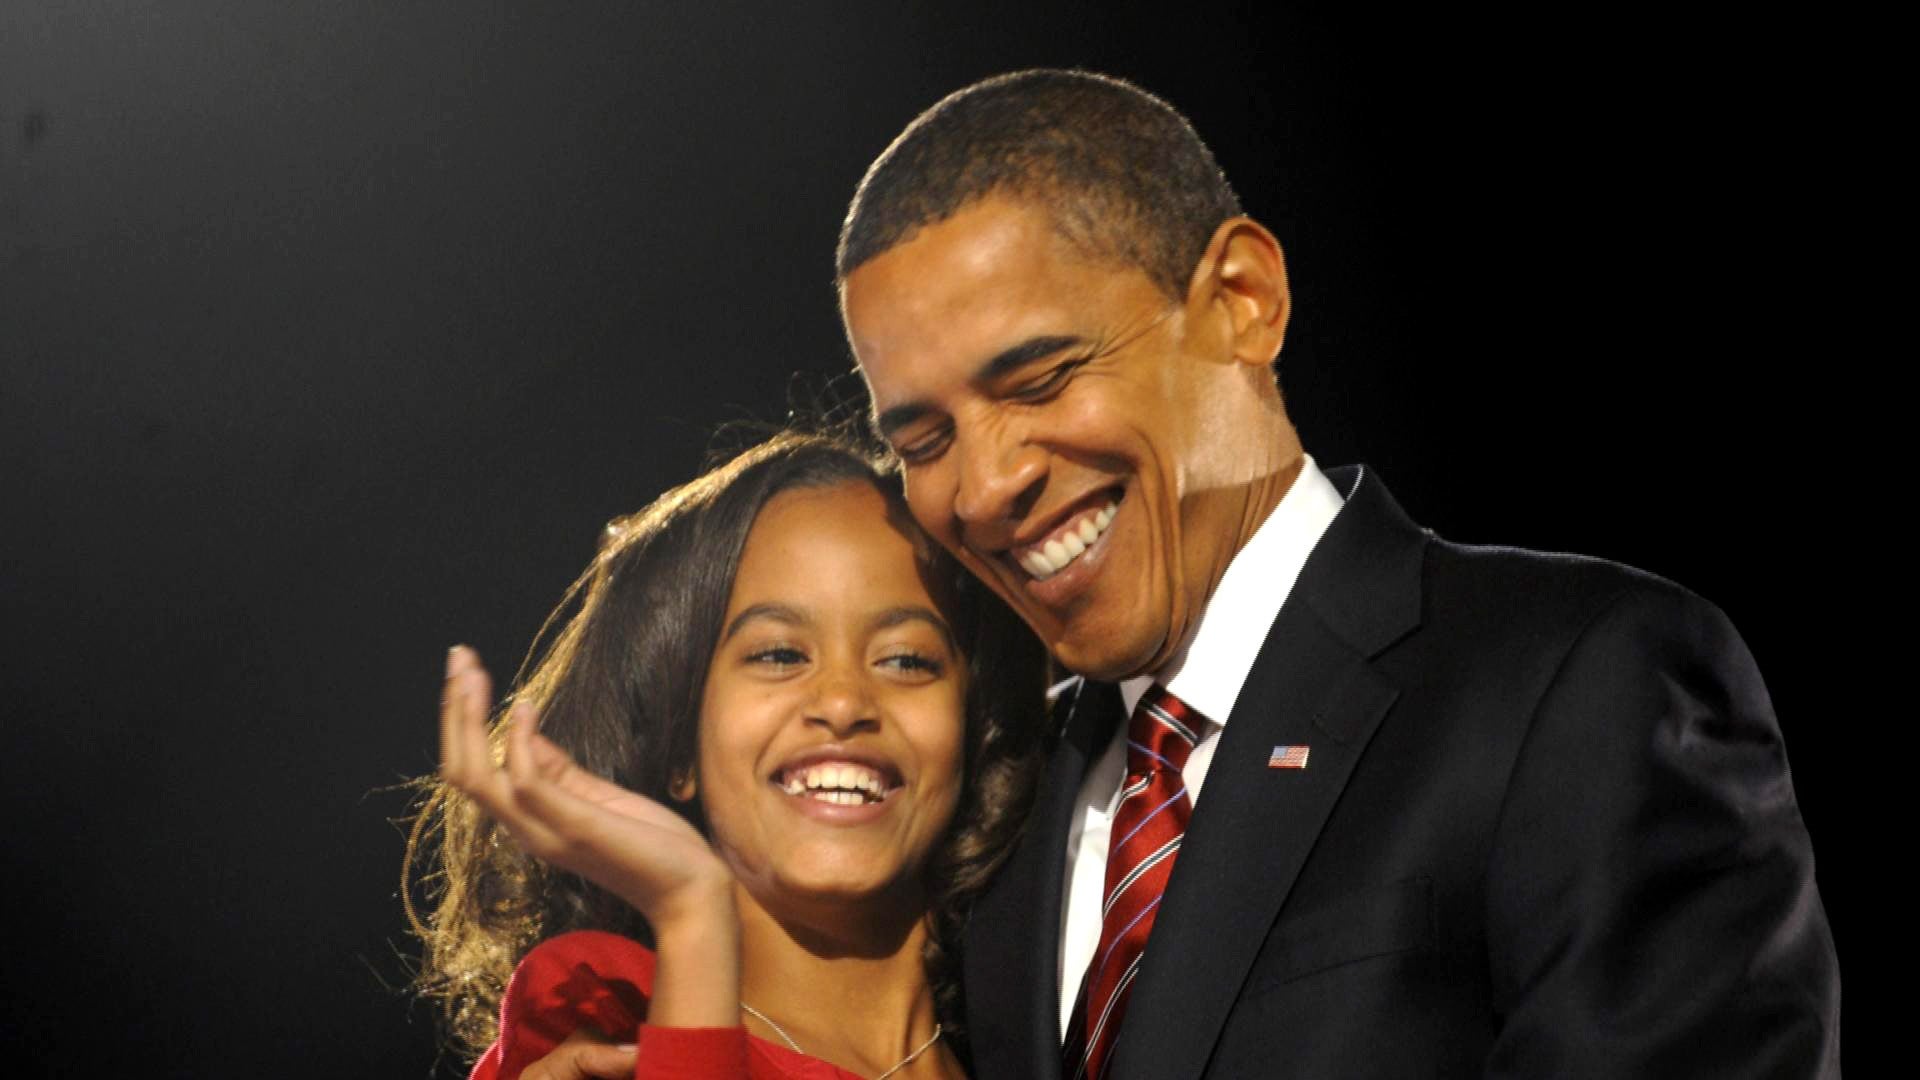 Dating white daughter guy obama Never Forget: